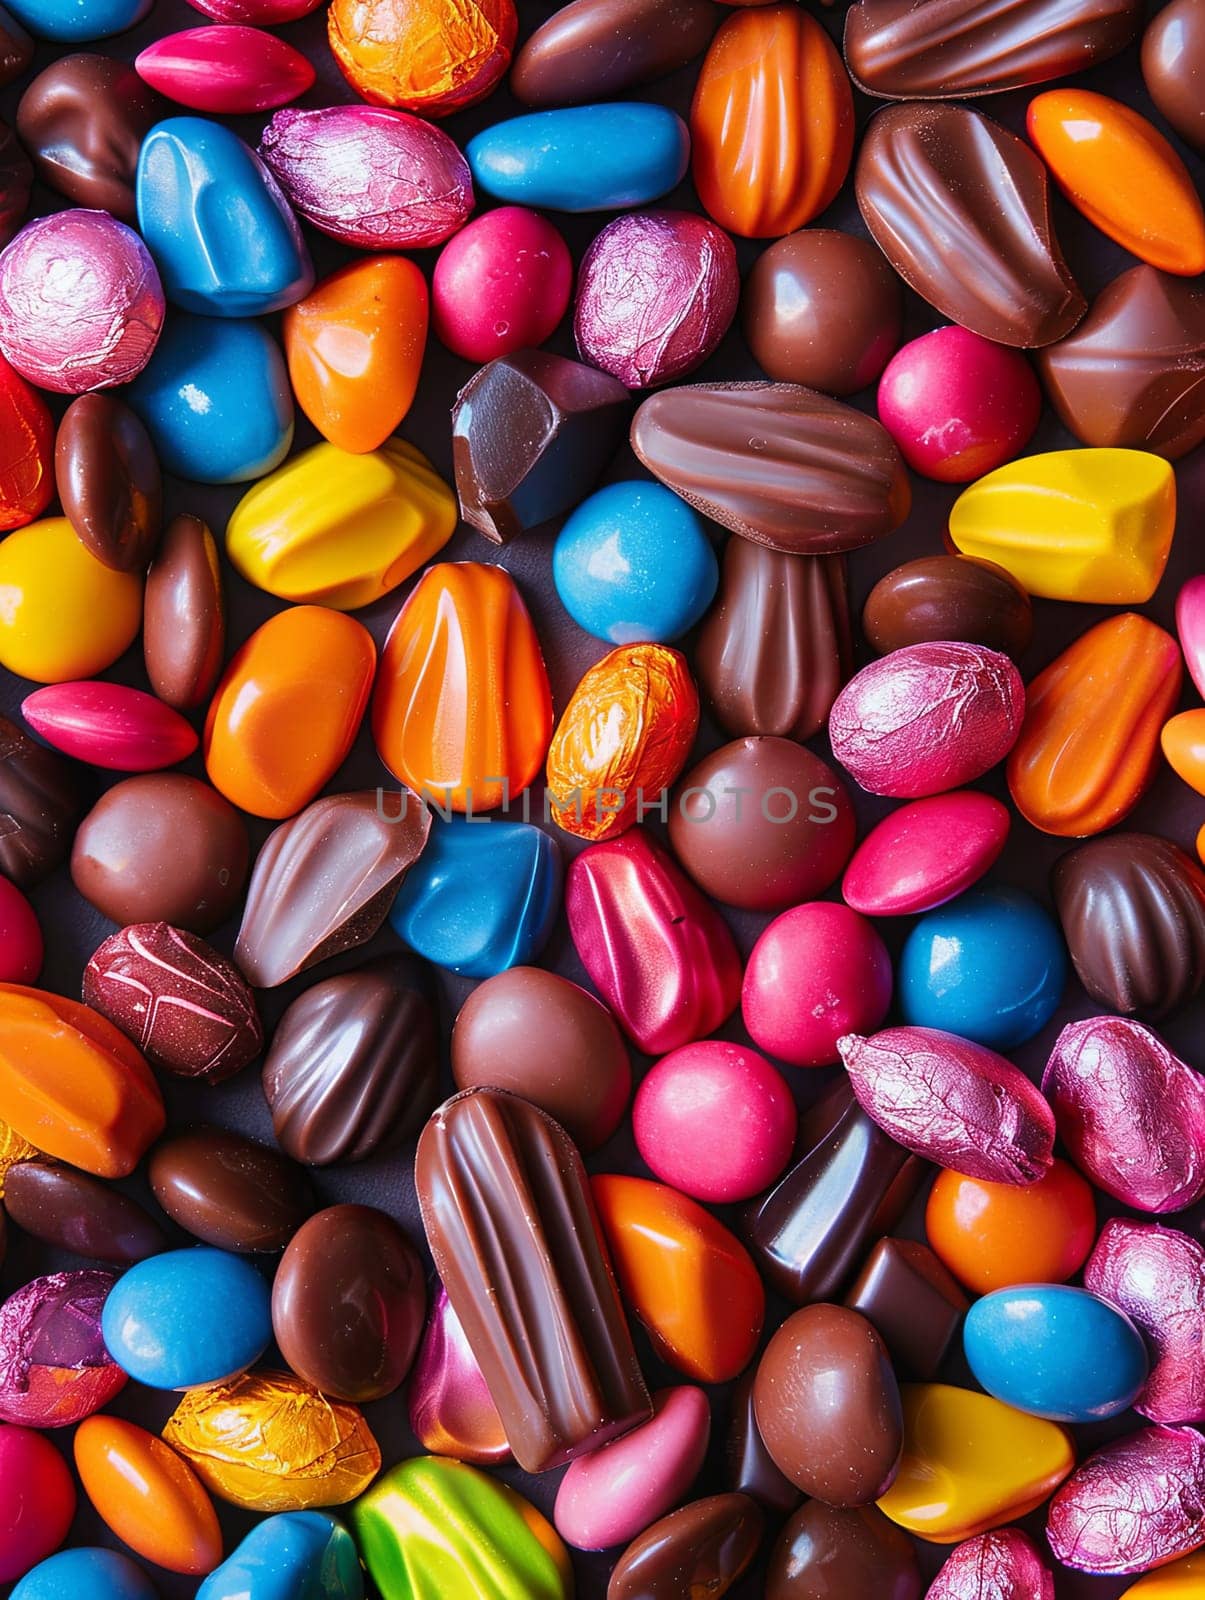 Vibrant close-up of assorted colorful chocolate candies piled together with shiny wrappers, high detail.